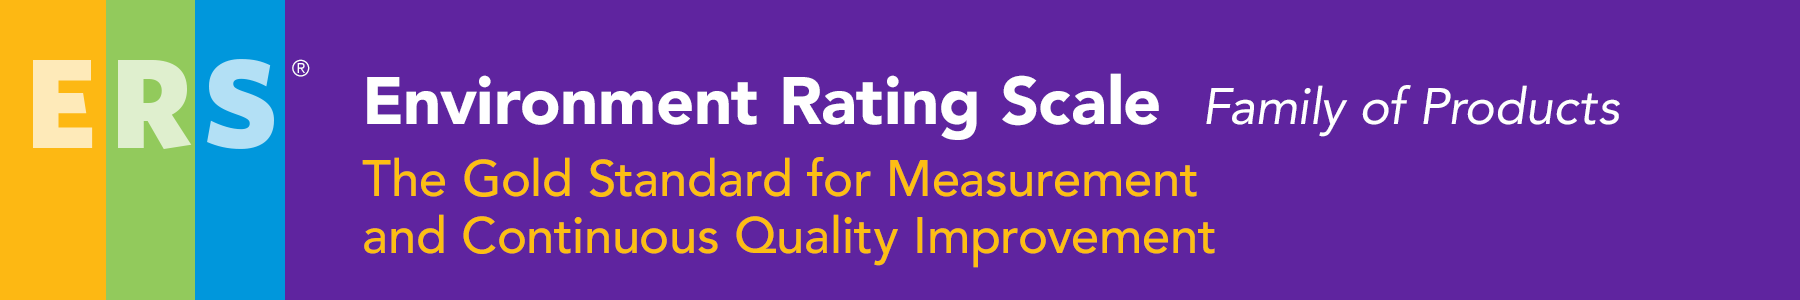 ERS® Environment Rating Scales, Family of Products